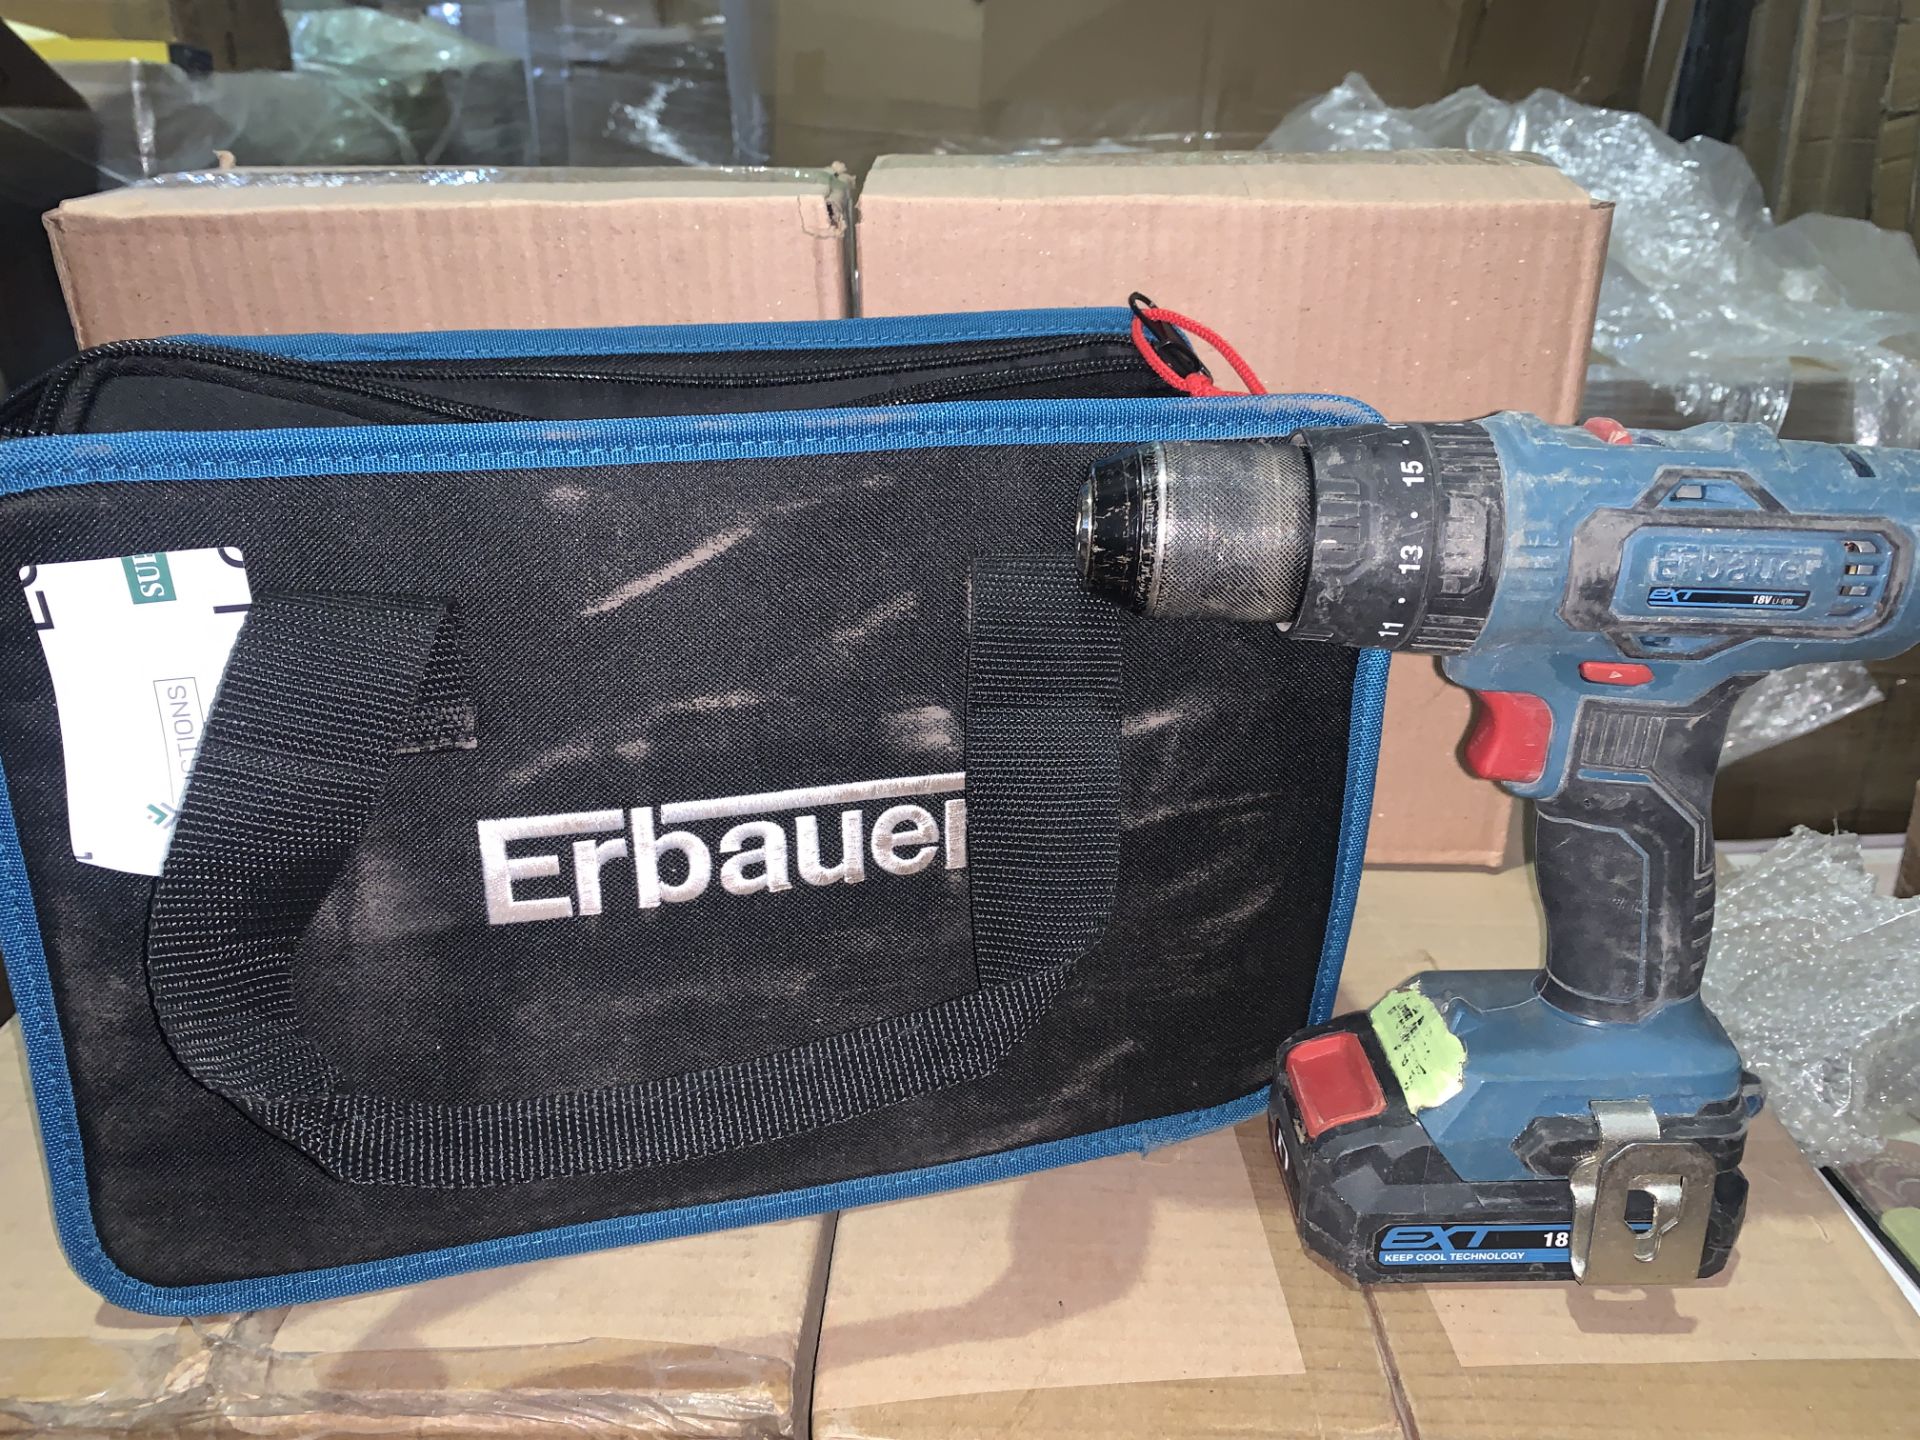 ERBAUER EBCD18LI-2 18V 2.0AH LI-ION EXT CORDLESS COMBI DRILL COMES WITH 2 X BATTERIES, CHARGER AND